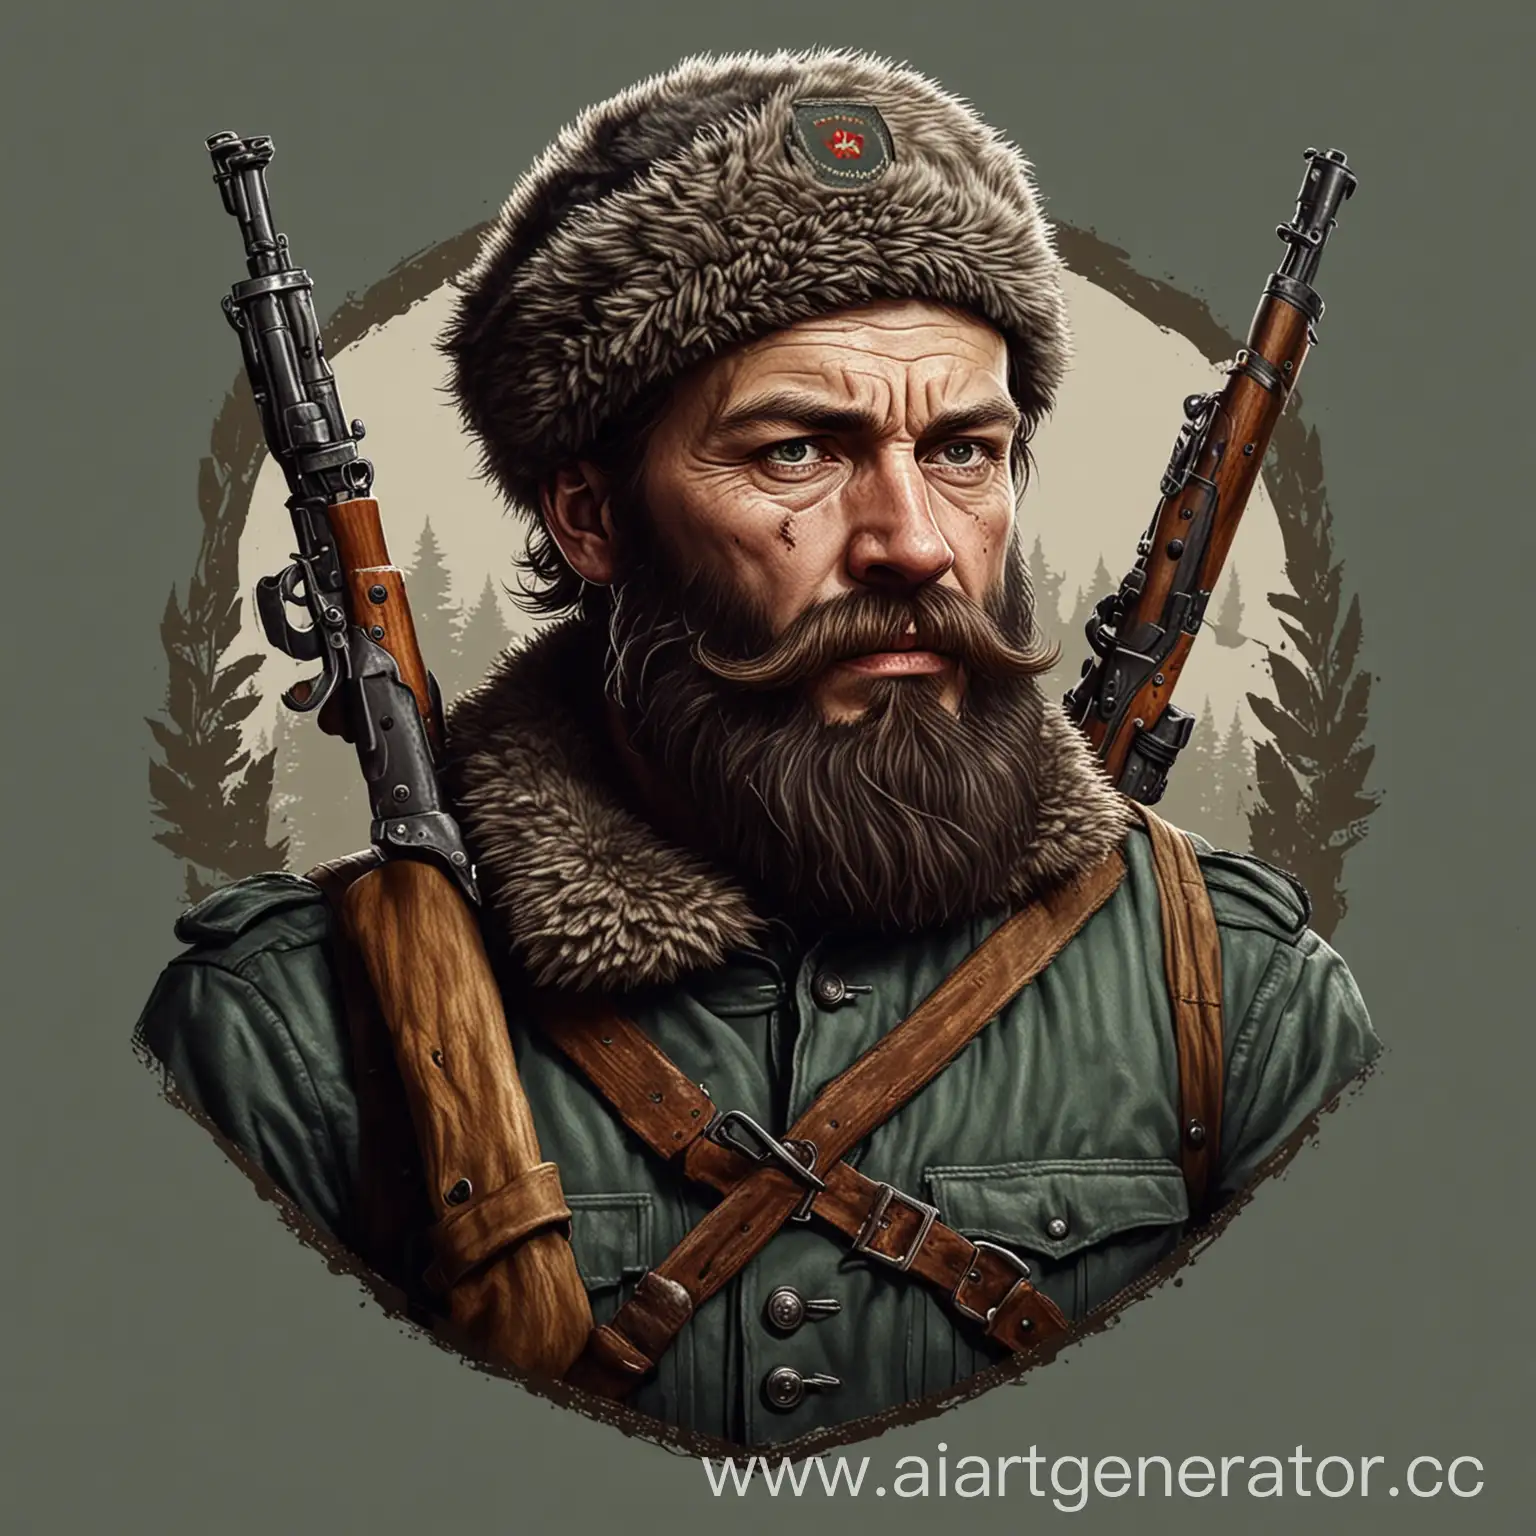 Russian-Bearded-Partisan-with-Rifle-and-Ushanka-Hat-DayZ-Style-Character-Logo